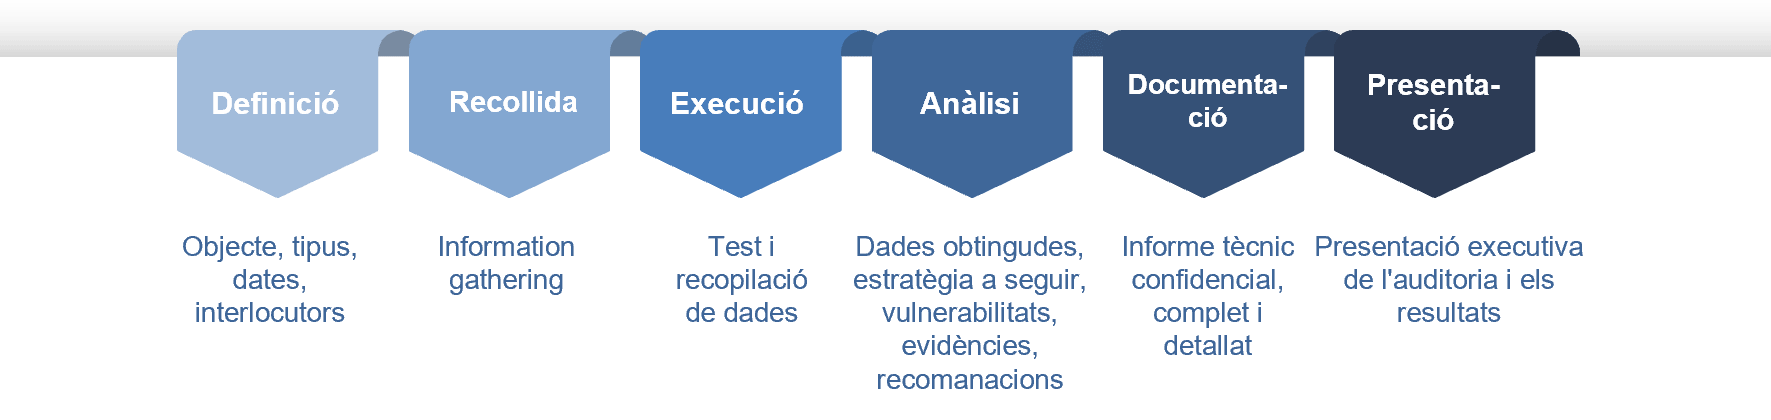 Ethical Hacking metodologia i fases